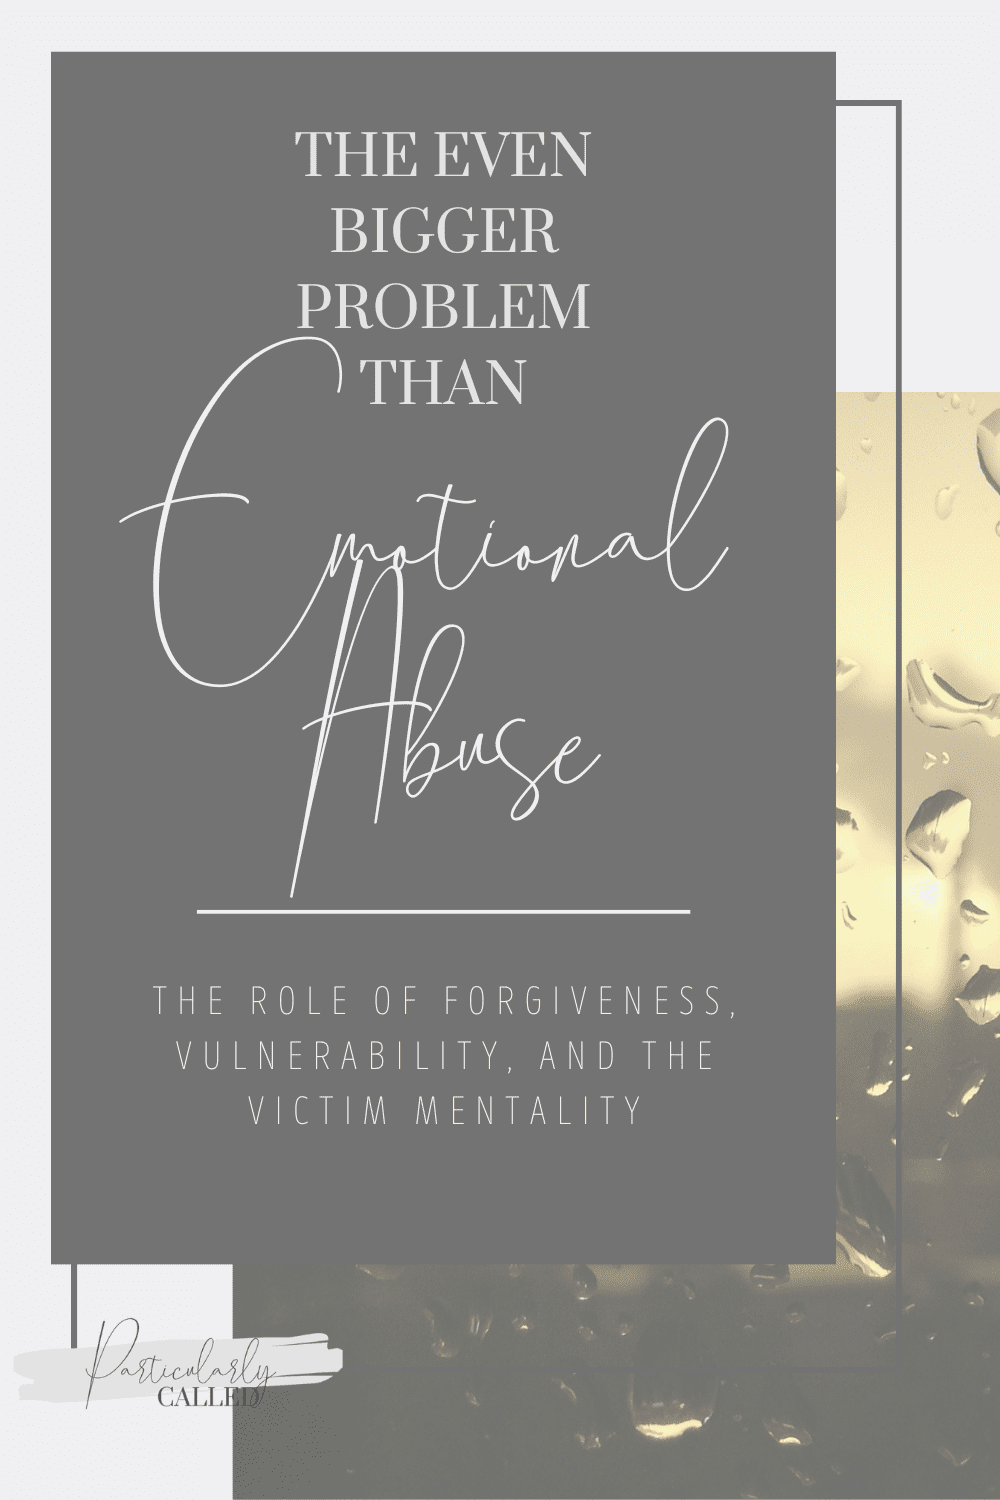 The Even Bigger Problem than Emotional Abuse…